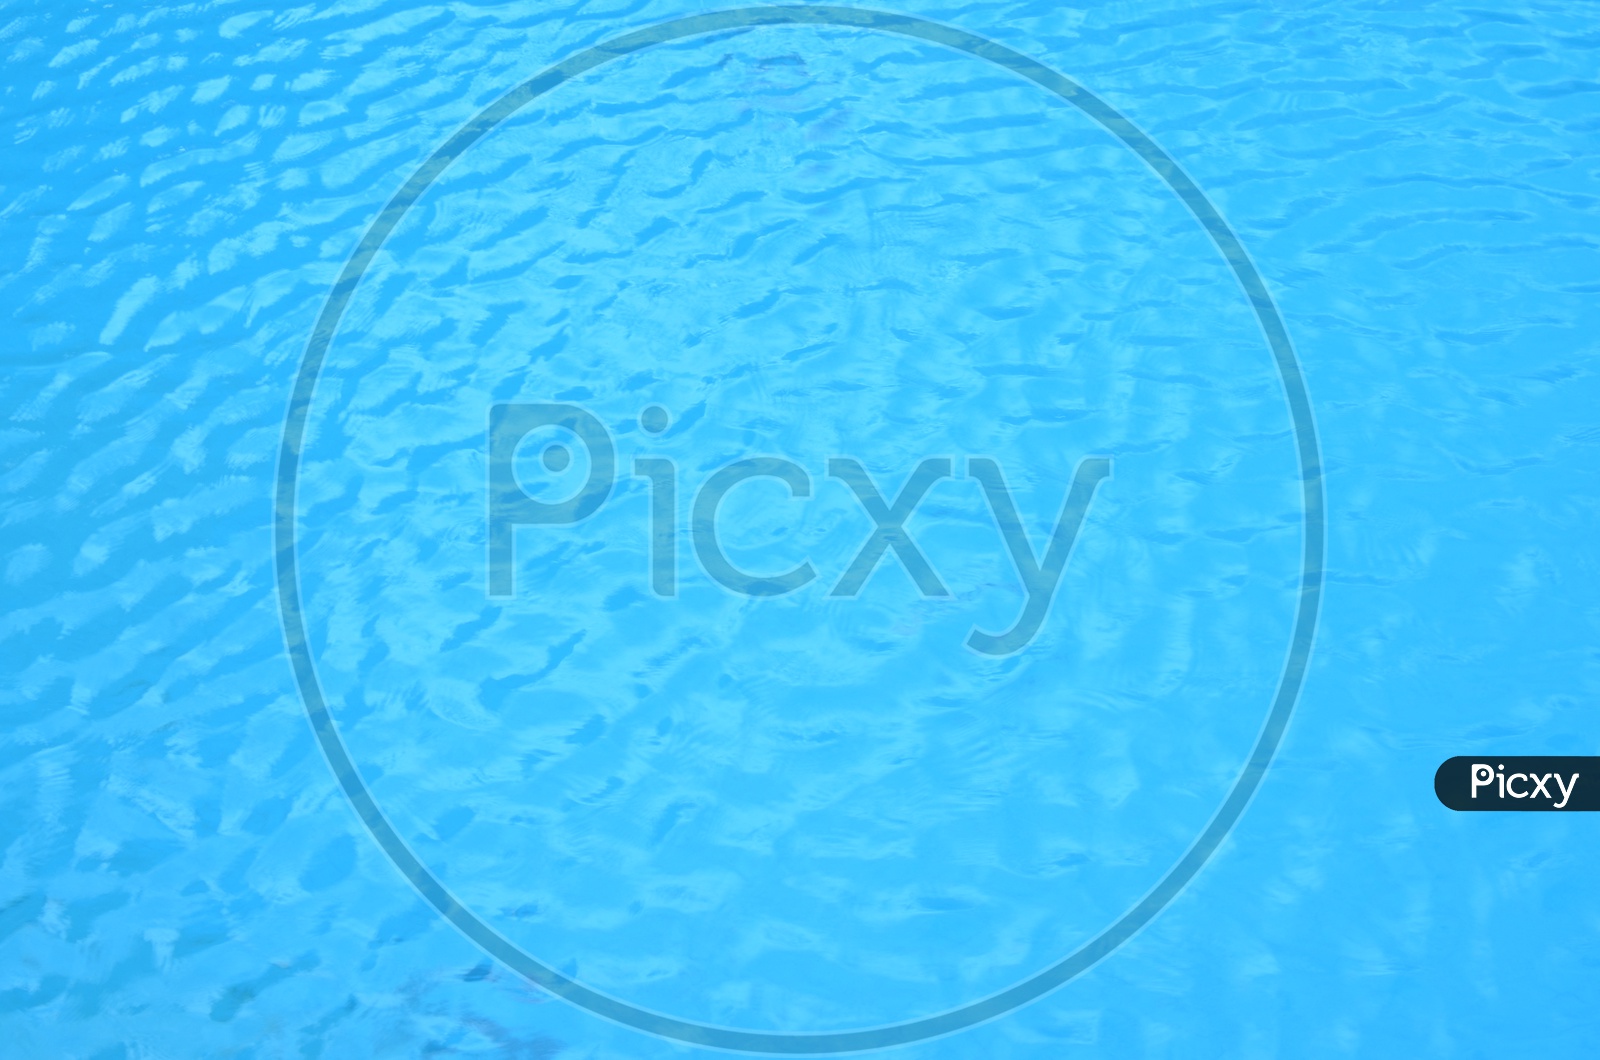 Abstract of Swimming pool Water with Ripples Surface